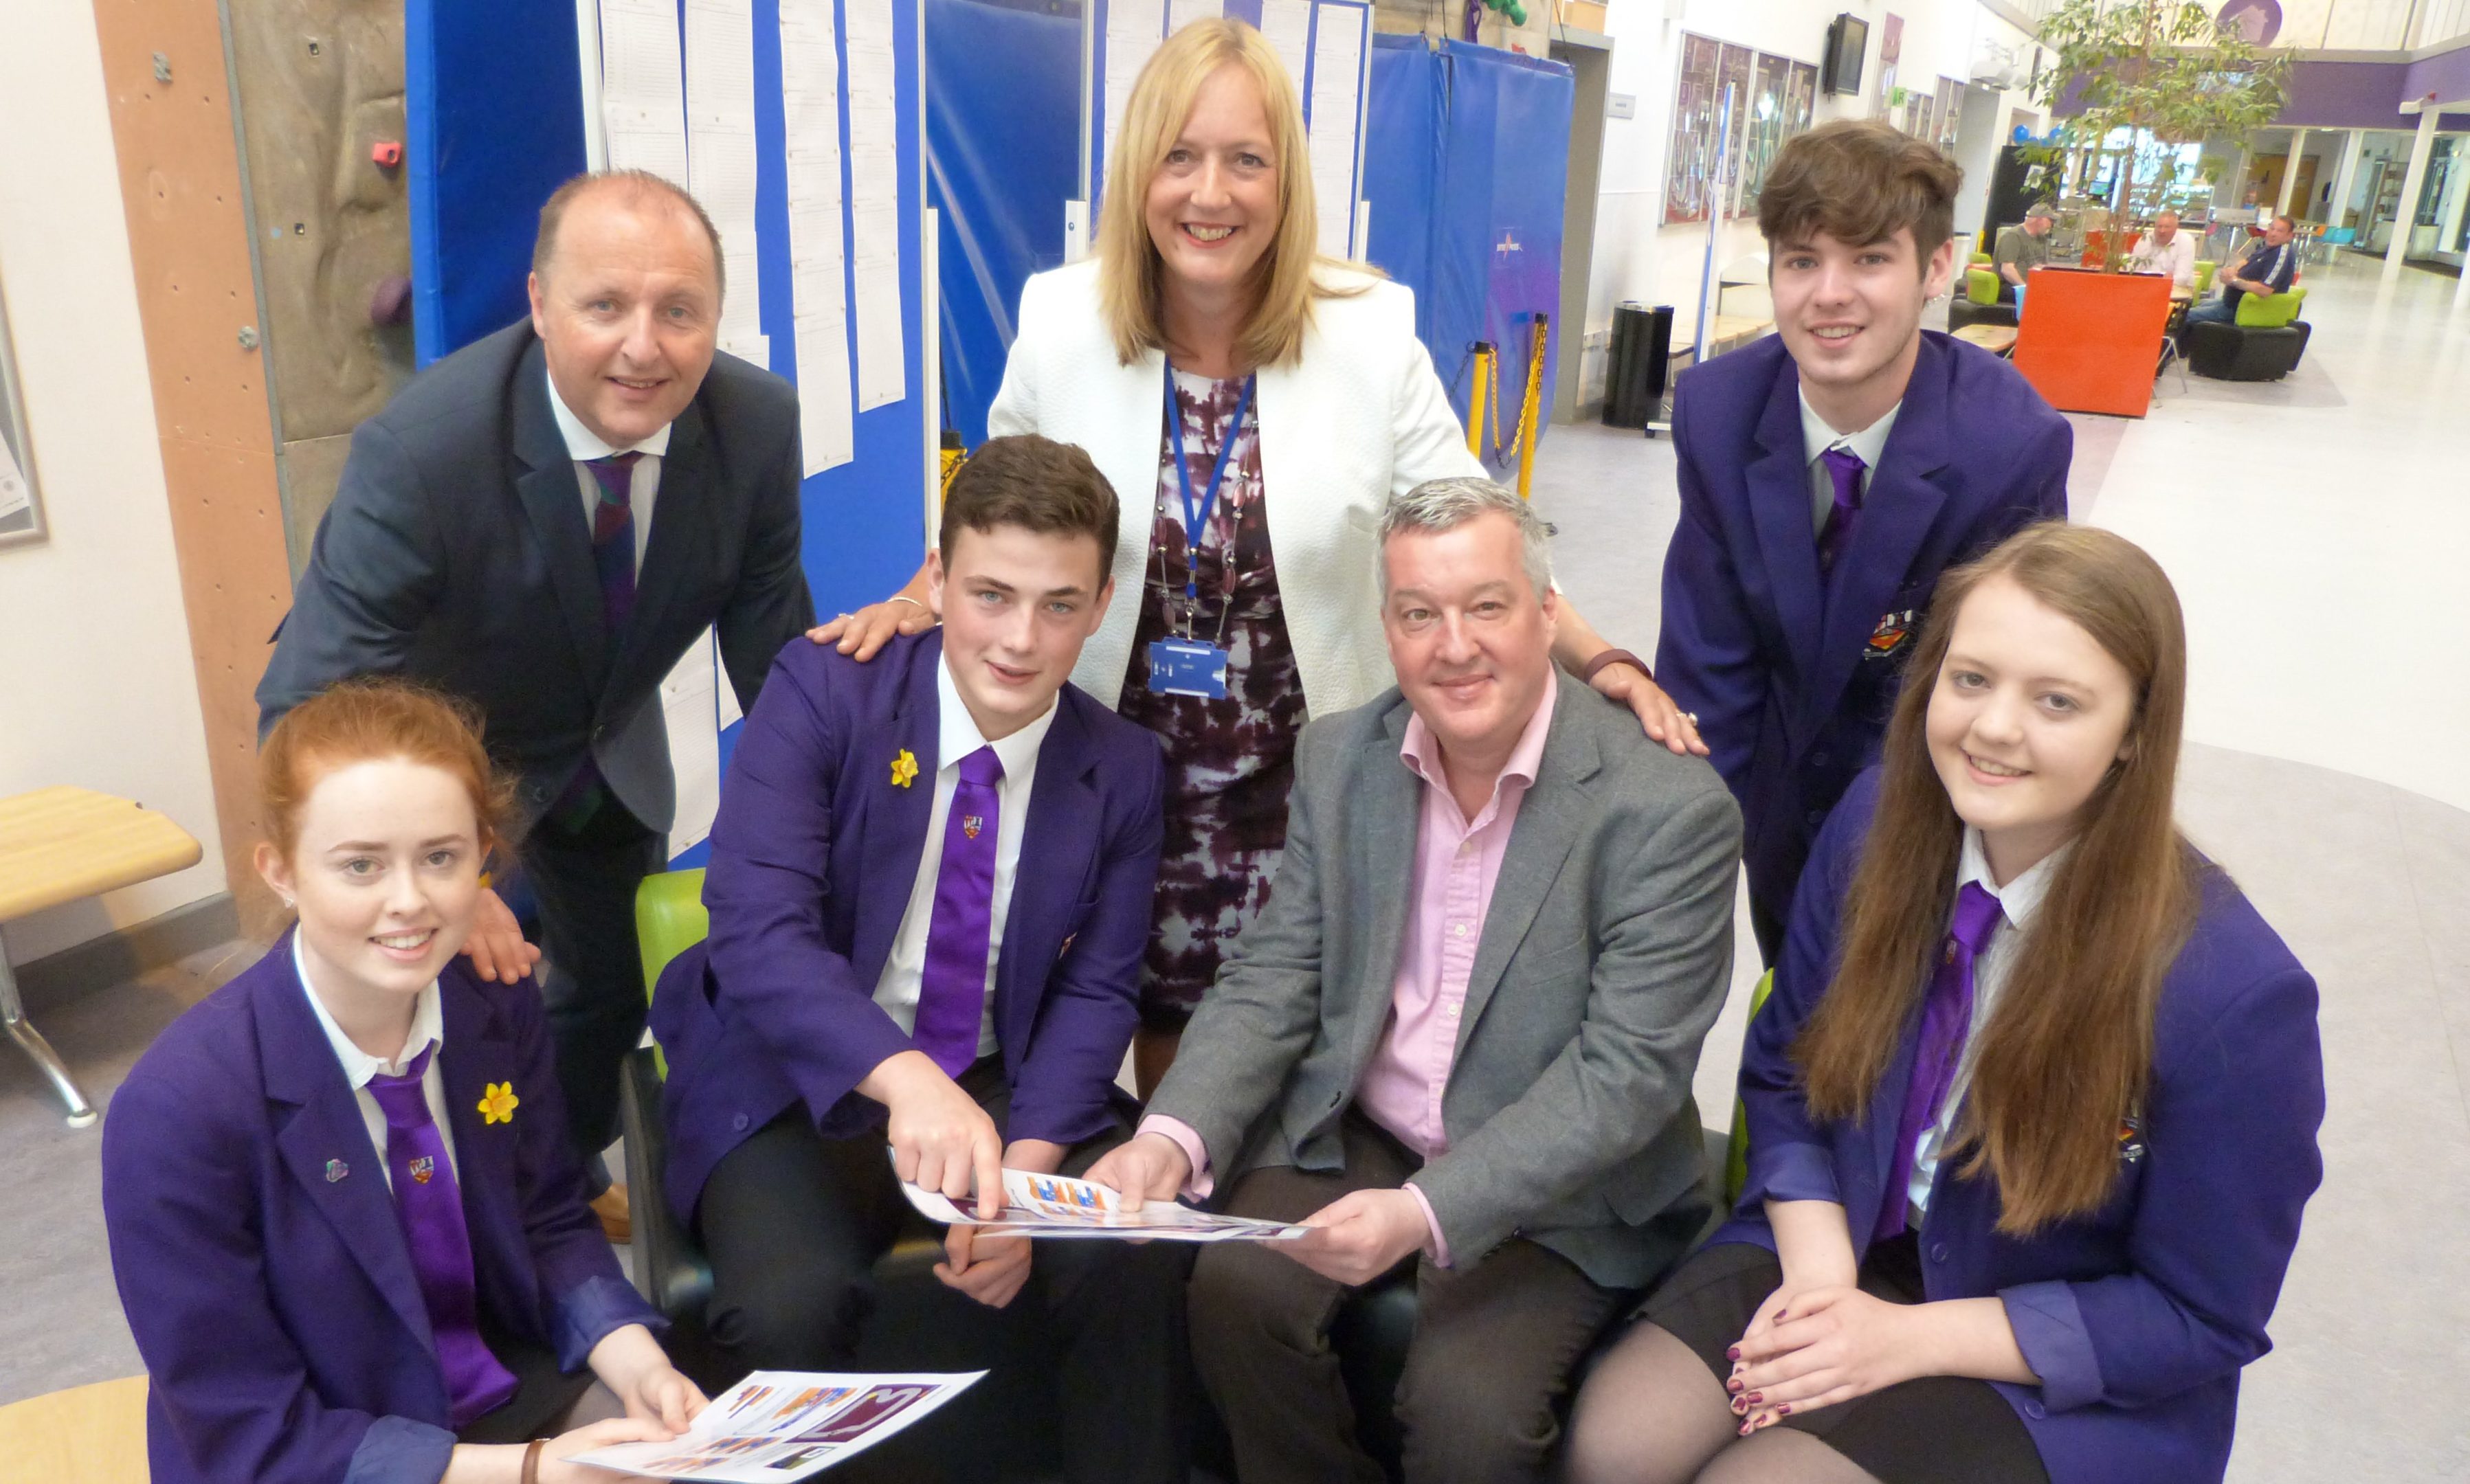 Made In Scotland Partnership course provider Gary Robinson with Kinross High School headteacher Sarah Brown, Binn Group commercial manager Jim Brown and some of the pupils working on the pilot project.